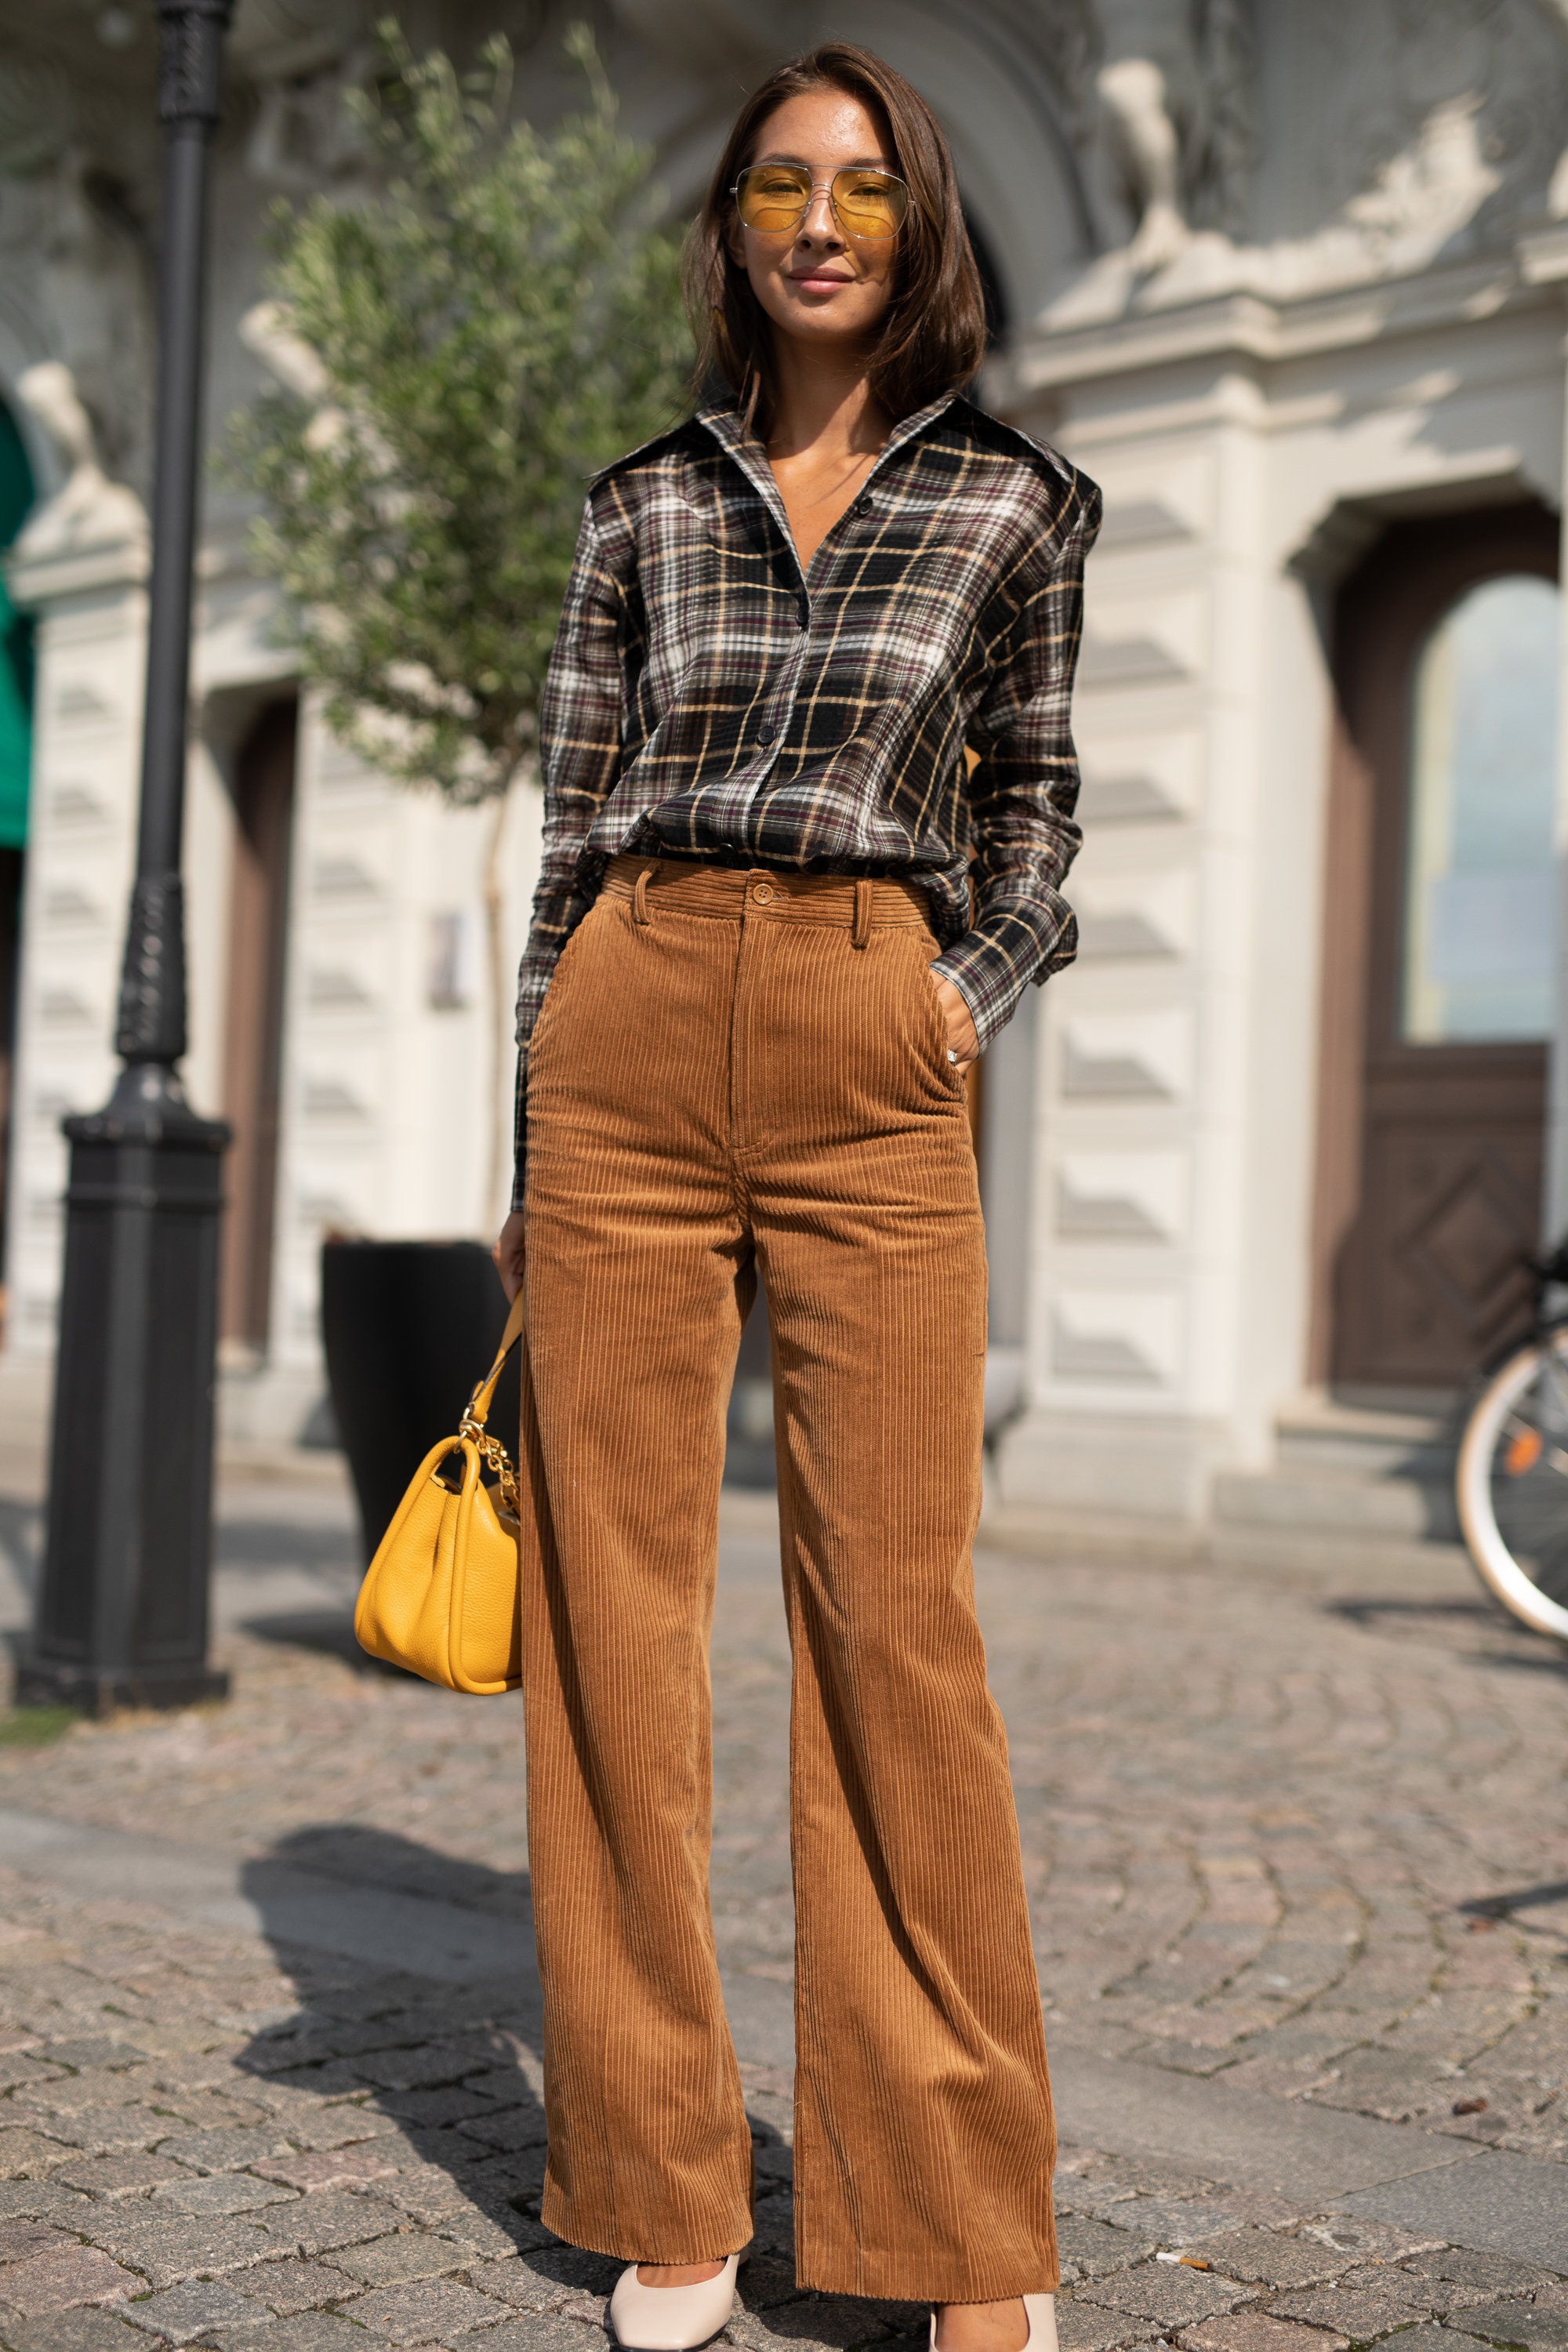 The 12 Best Shoes to Wear With Wide-Leg Pants